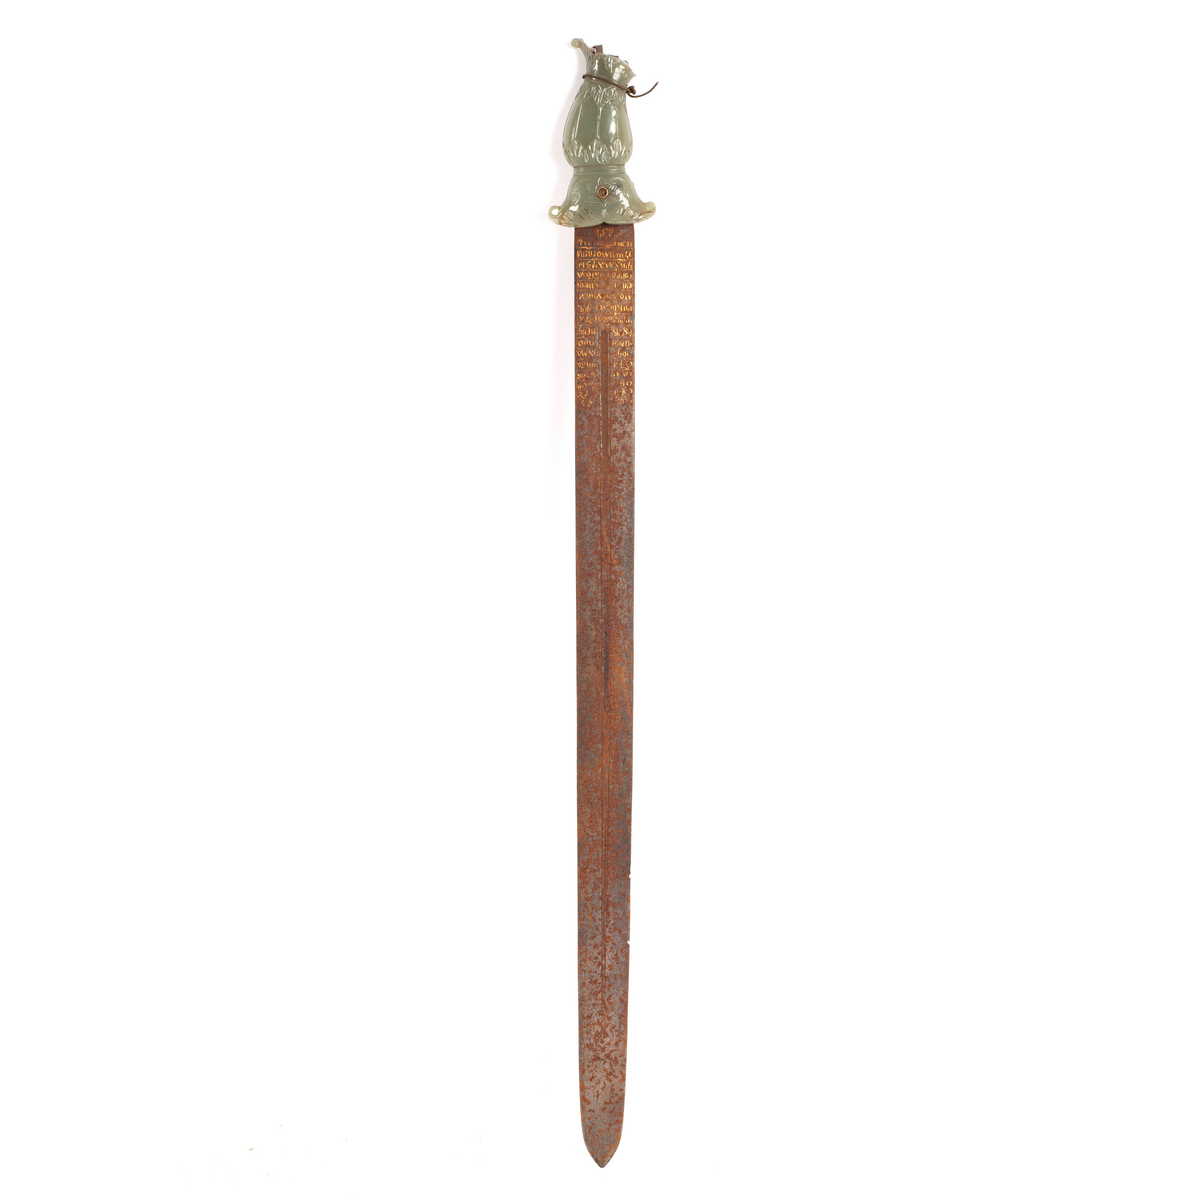 A Mughal sword with jade grip (damaged) and gold inlaid blade, 71.